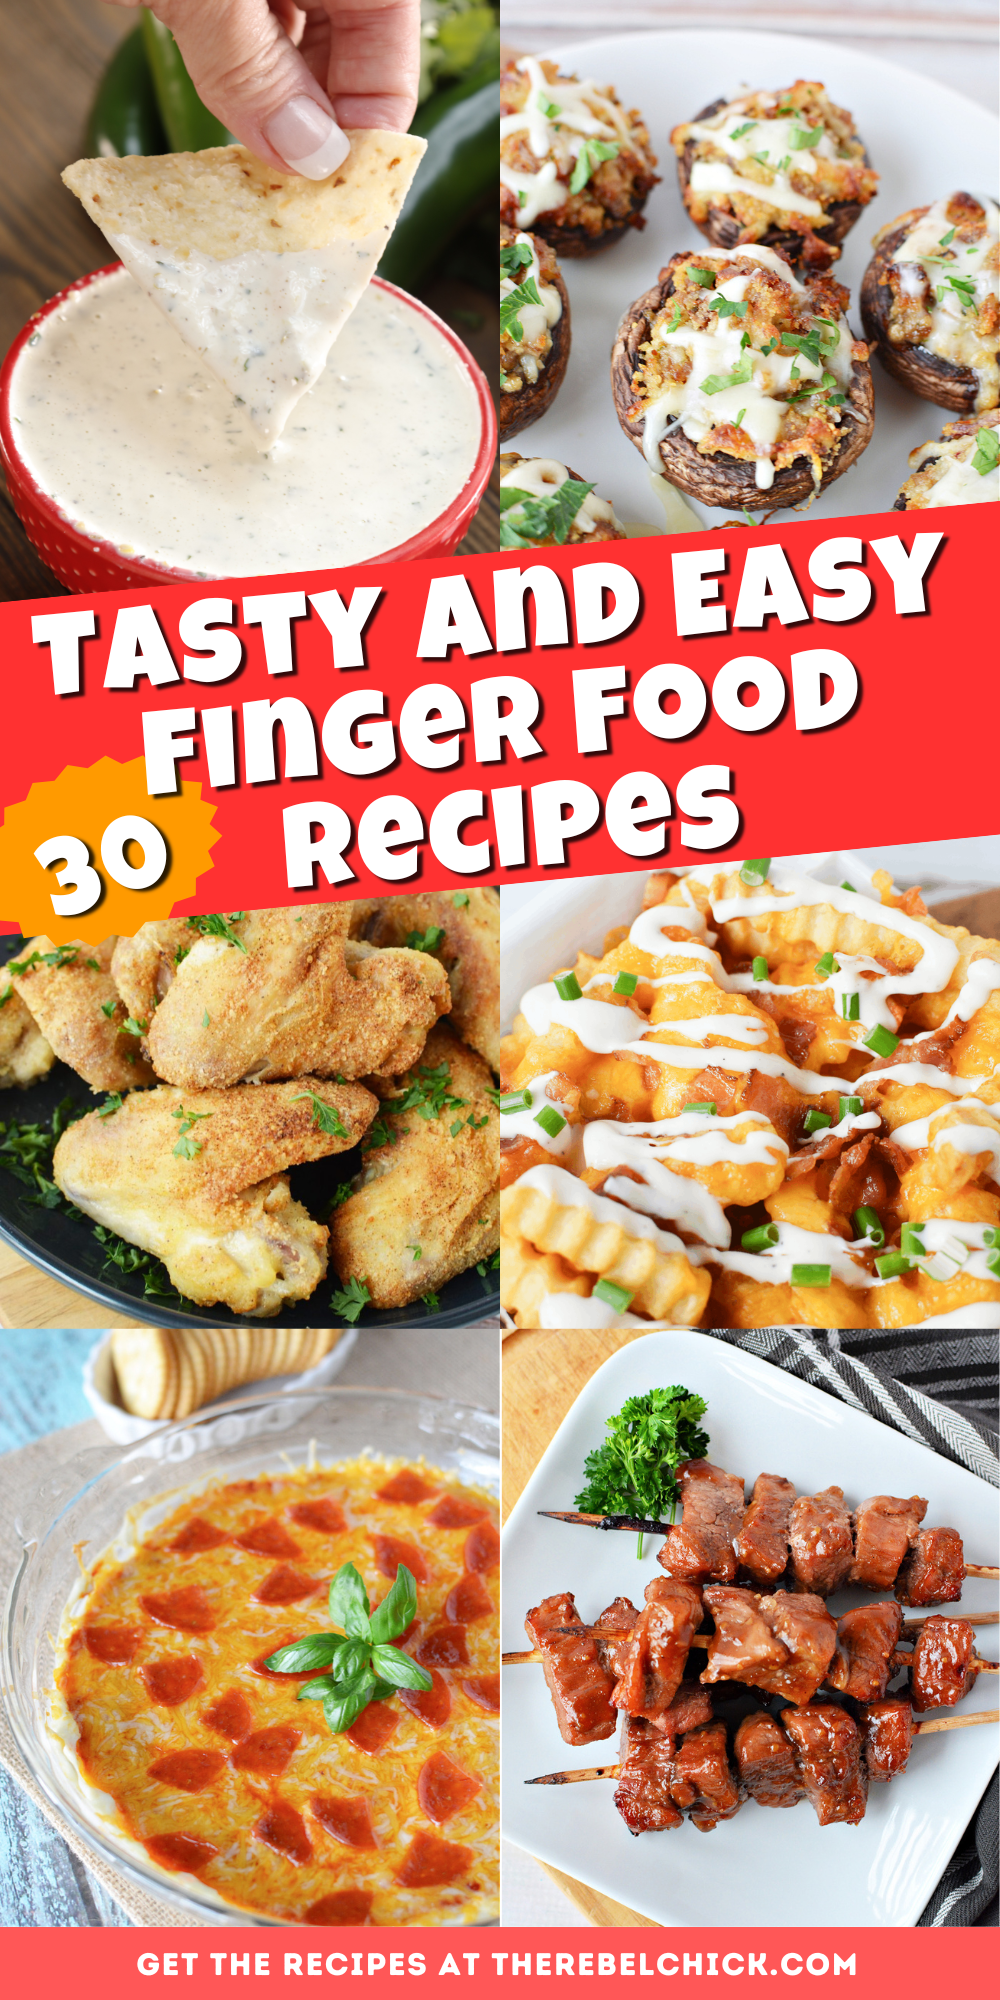 30 Tasty and Easy Finger Food Recipes